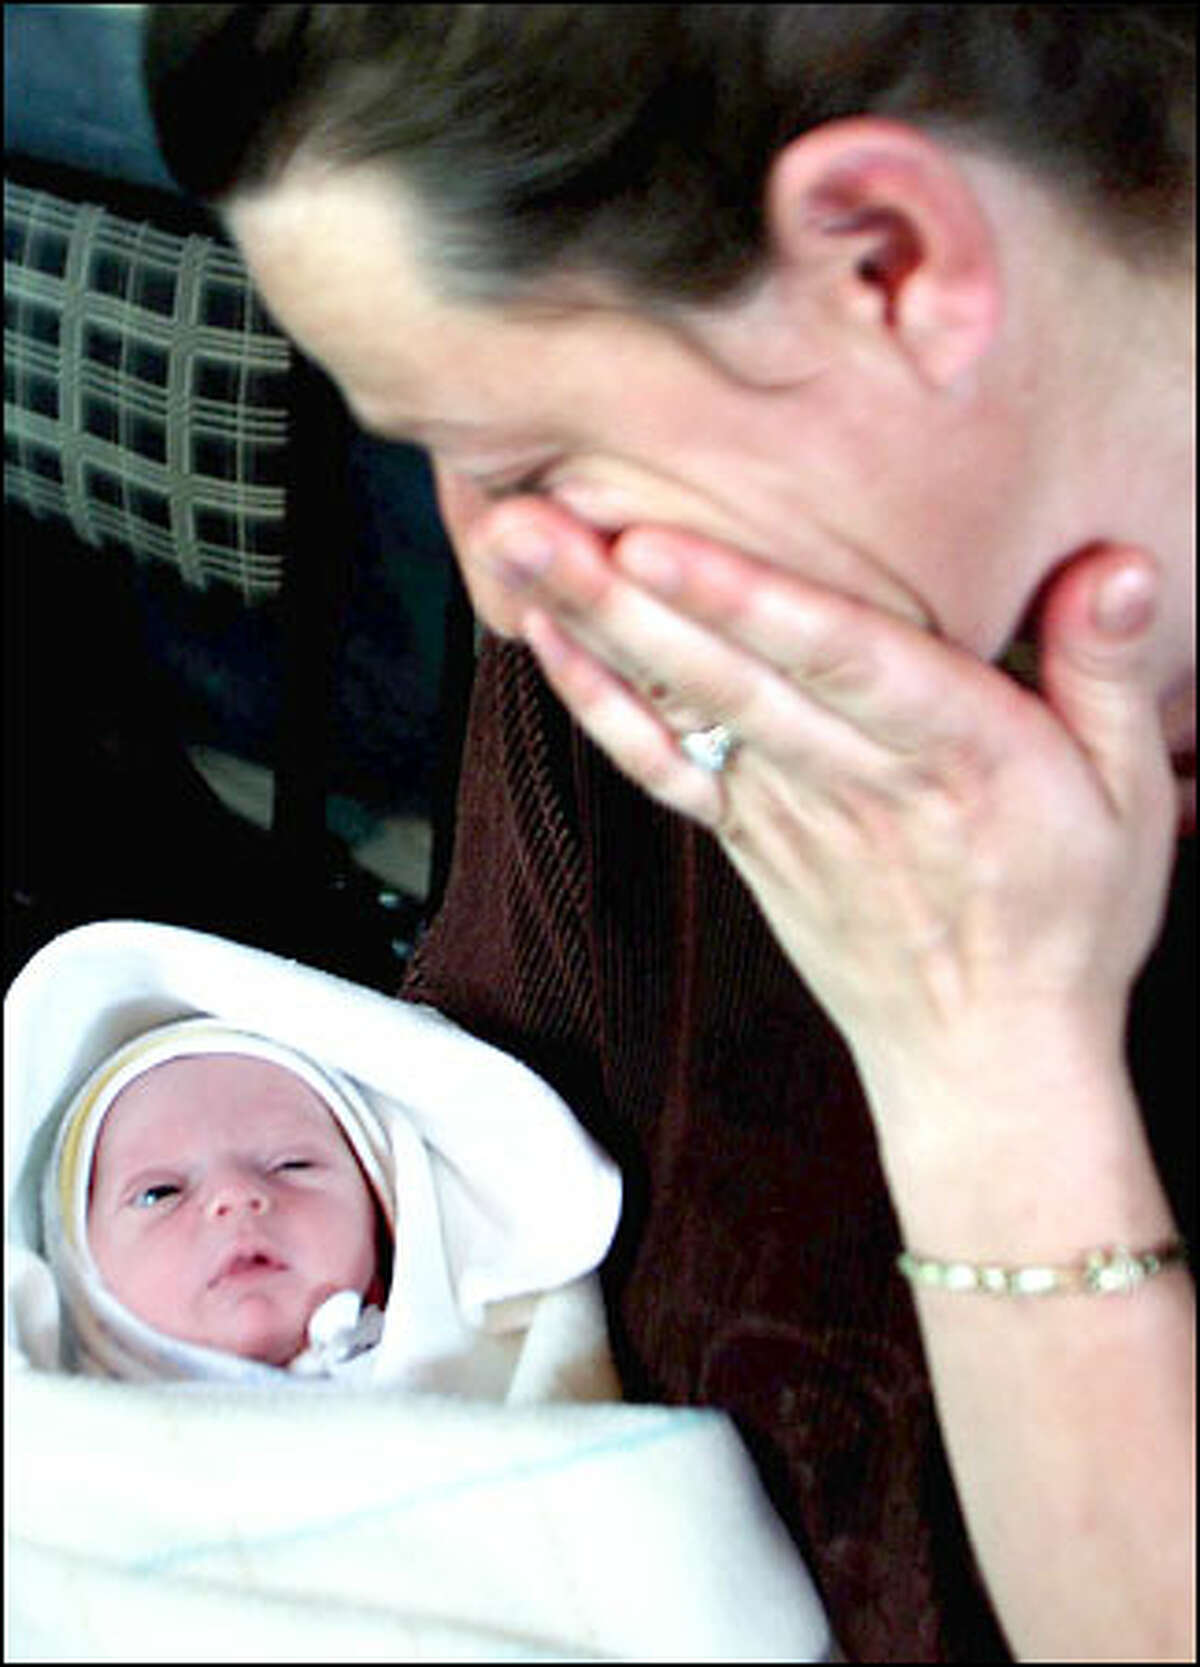 Ethnic Albanian Lirije Arifi weeps as she looks at her 3-day-old daughter, Leutrim, one of the youngest refugees who crossed into Kosovo. The U.N. agency there reported about 42,000 refugees from Macedonia.